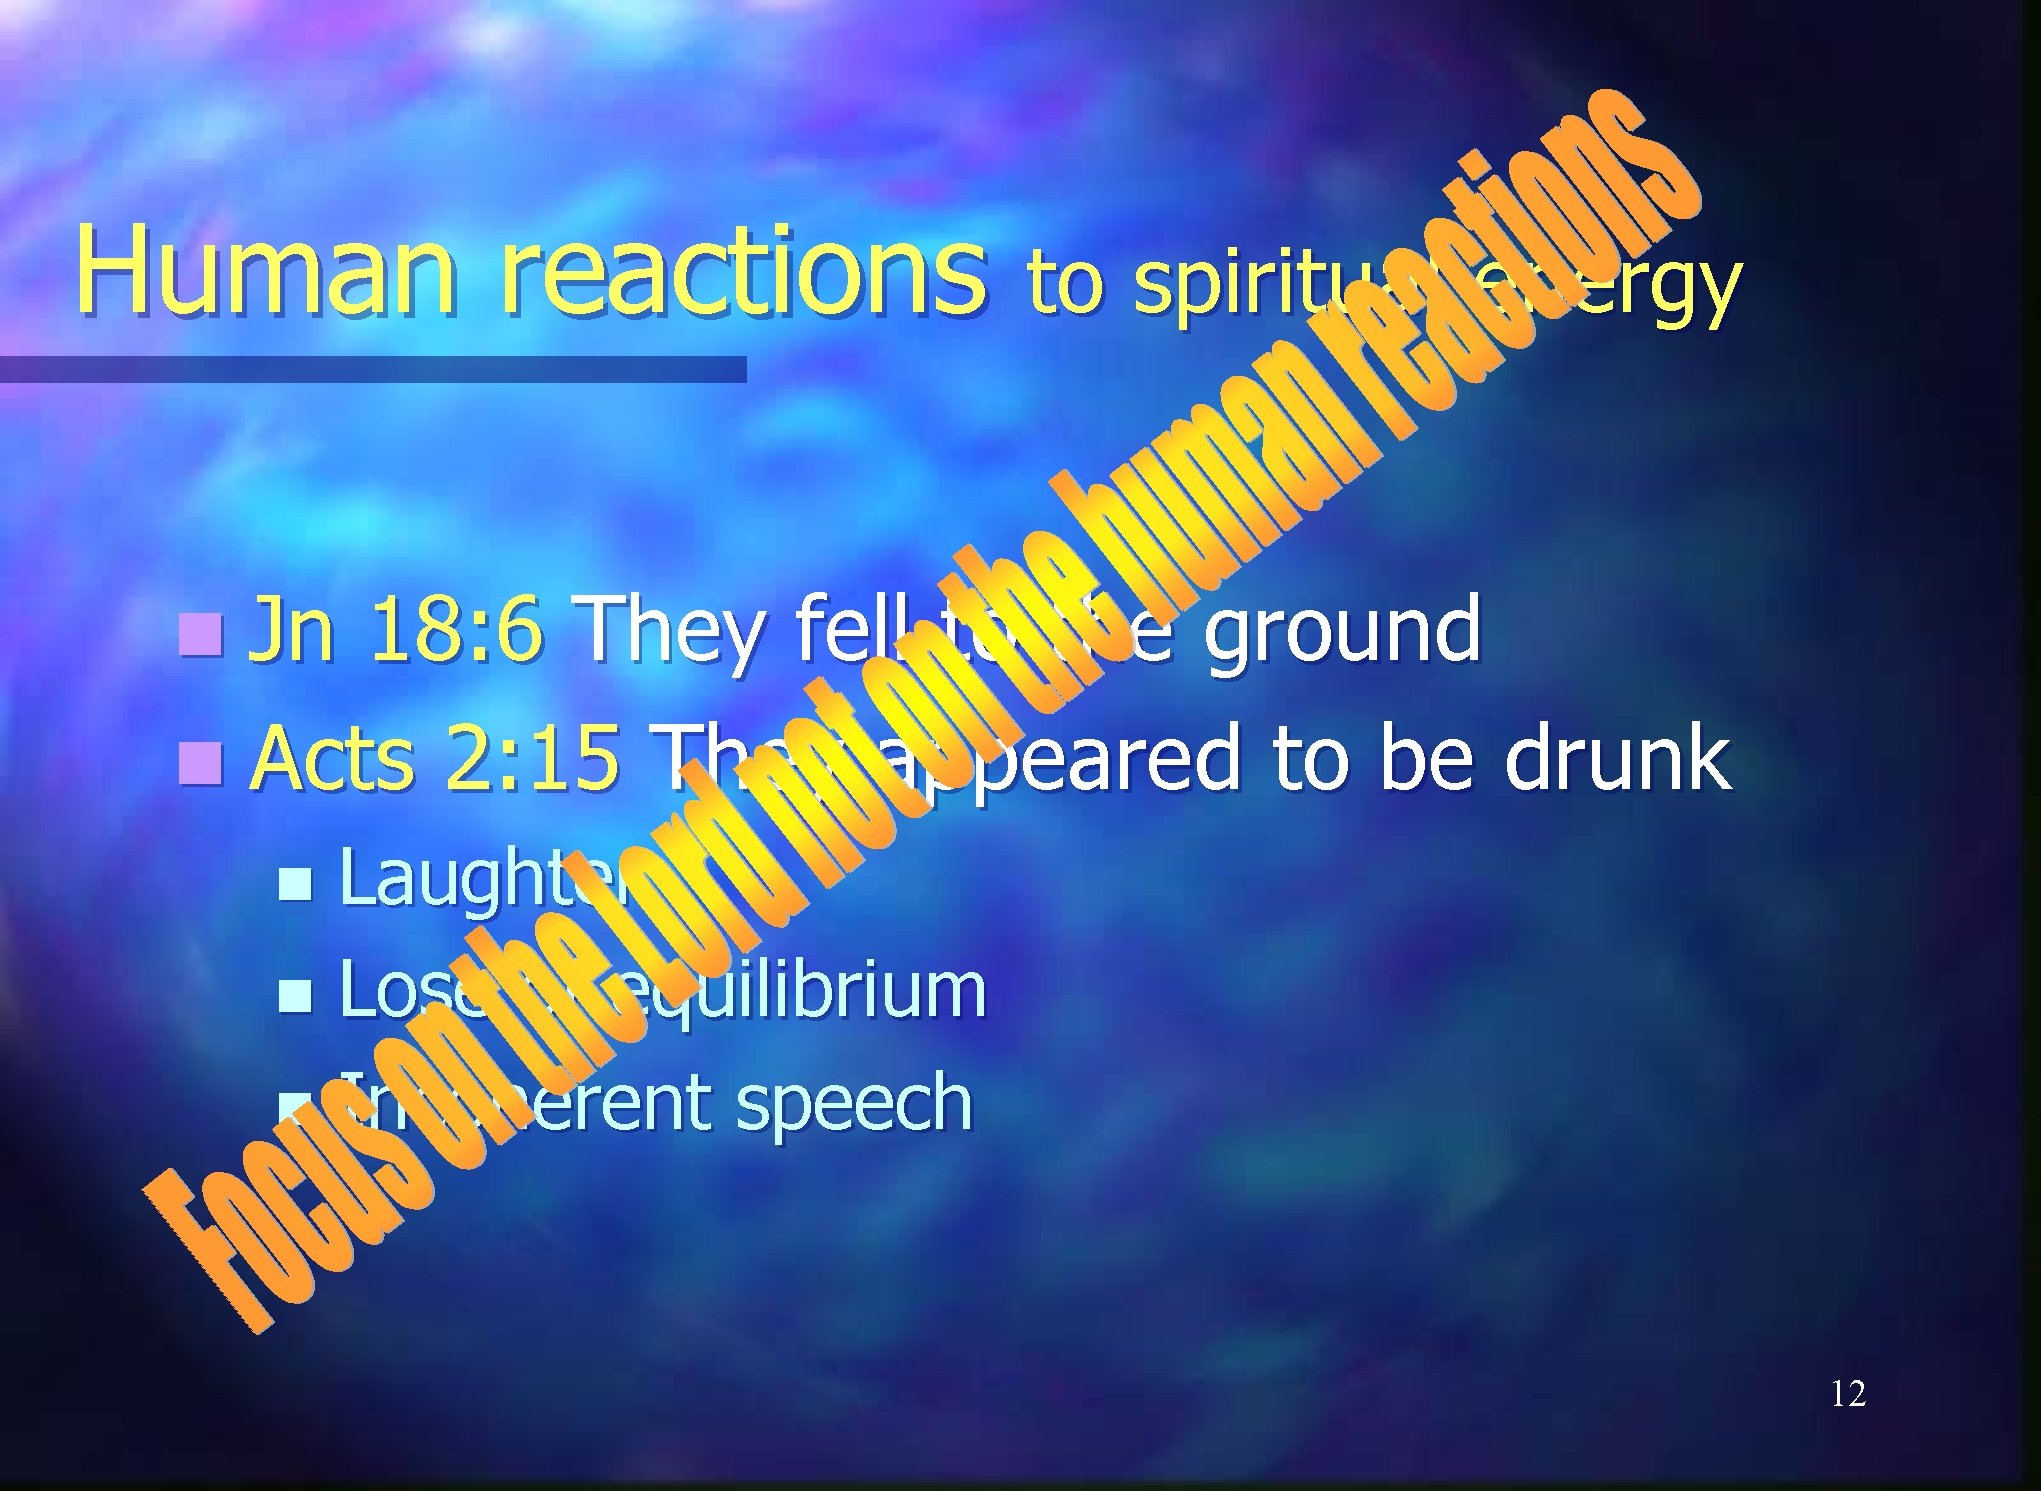 Human reactions to spiritual energy n Jn 18: 6 They fell to the ground